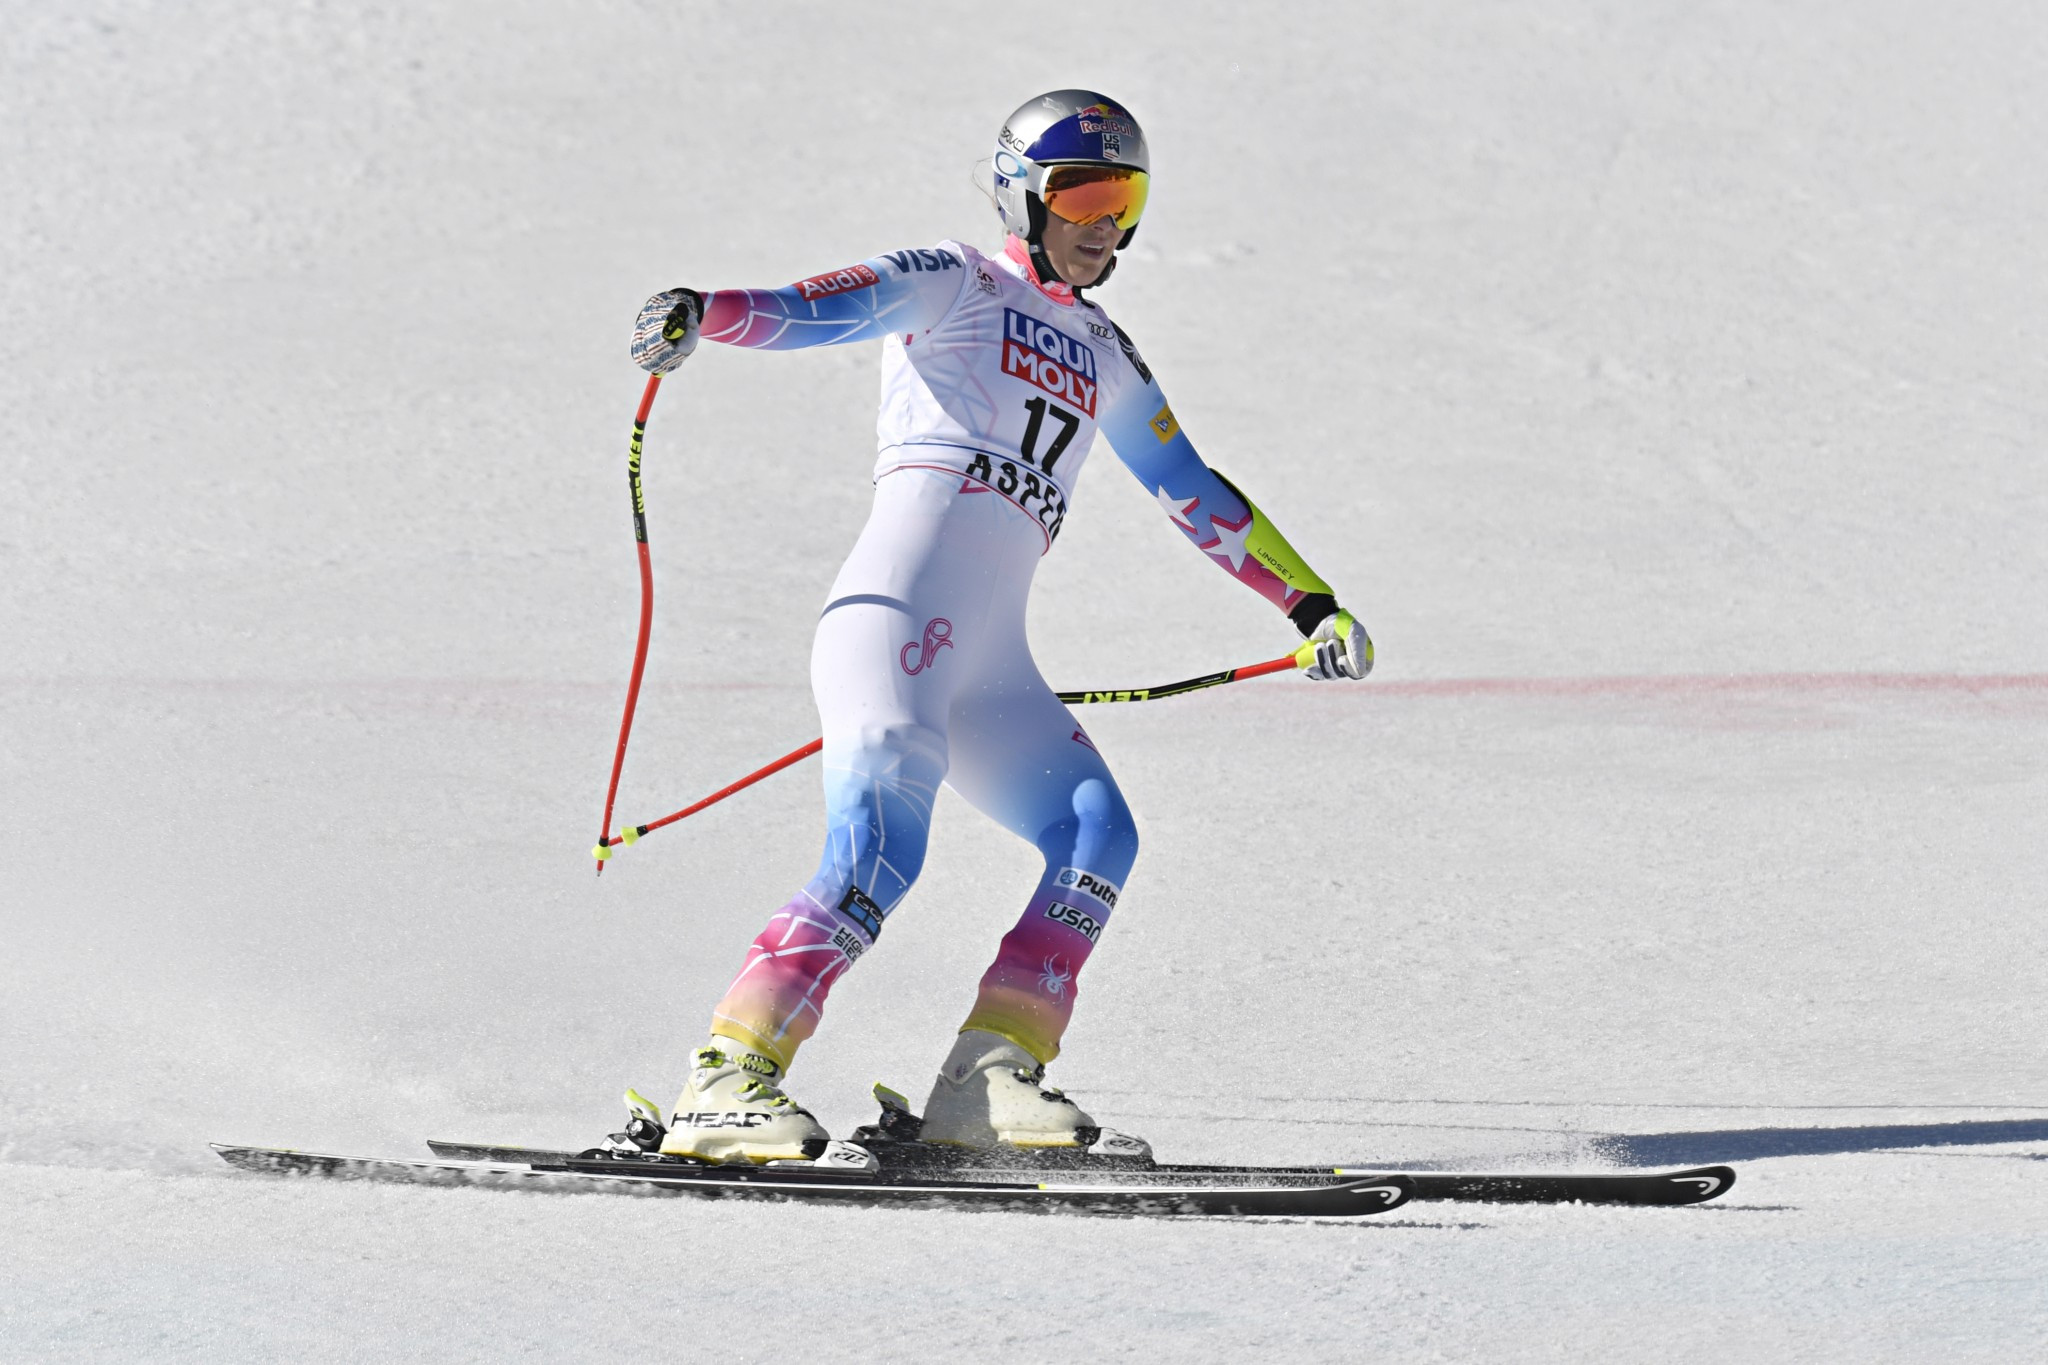 Lindsey Vonn has enjoyed previous success at Lake Louise ©Getty Images